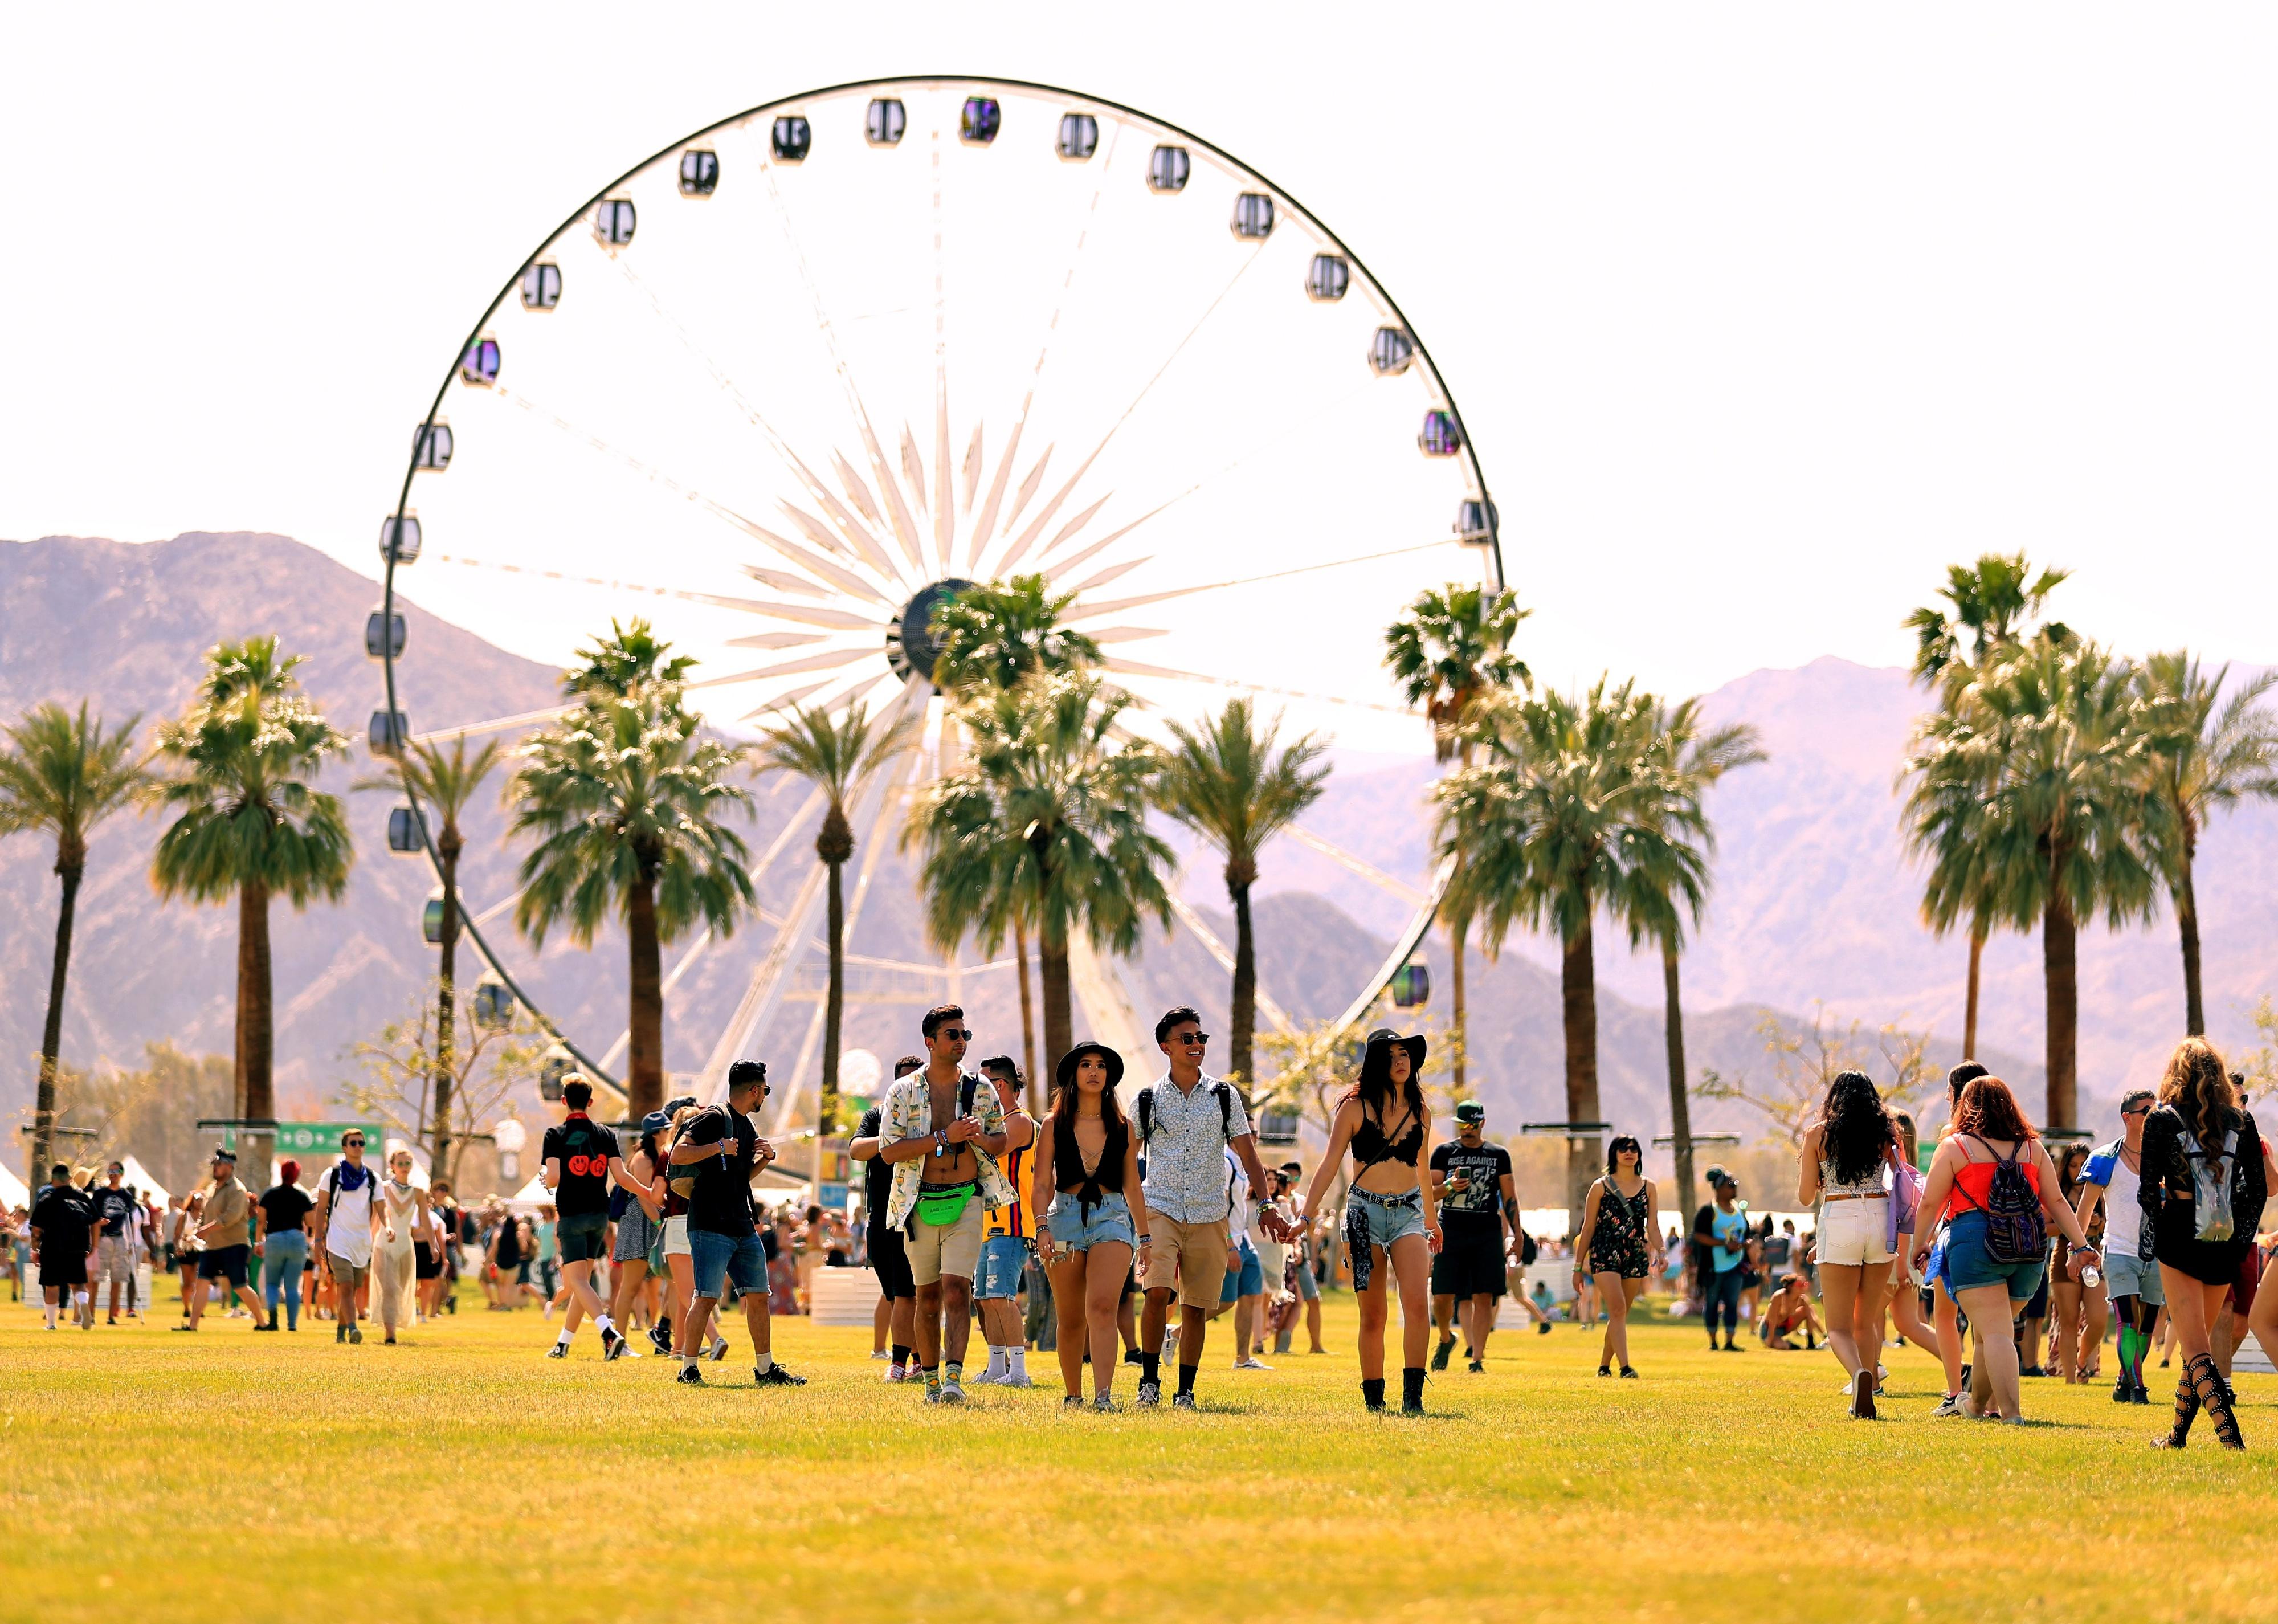 Festivalgoers at the 2018 Coachella Valley Music And Arts Festival.